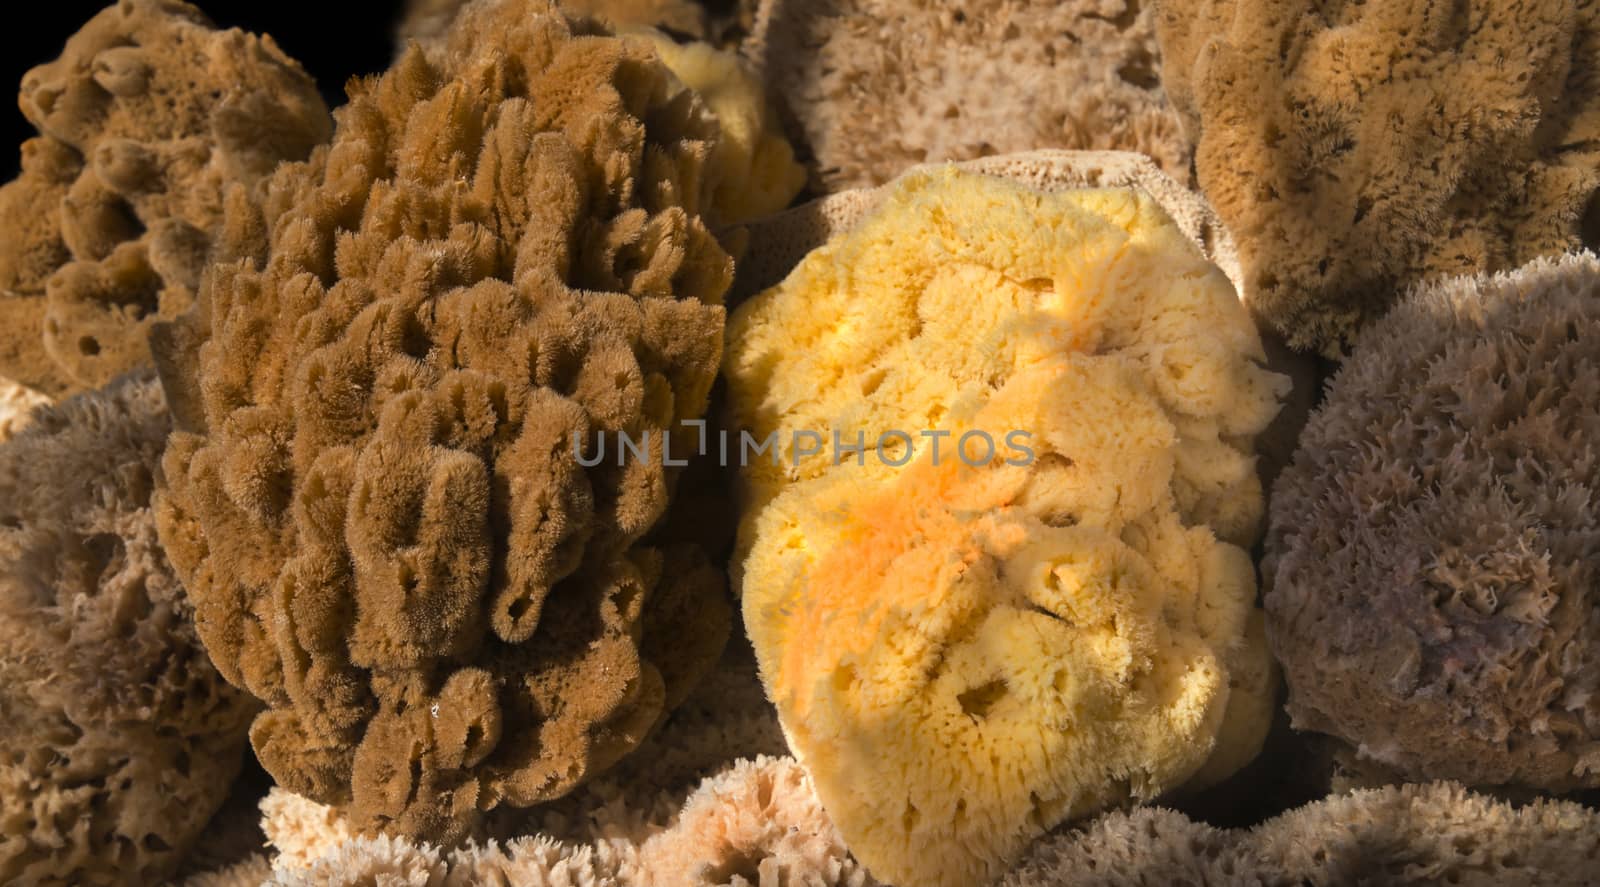 A Variety of Yellow and Brown Sea Sponges